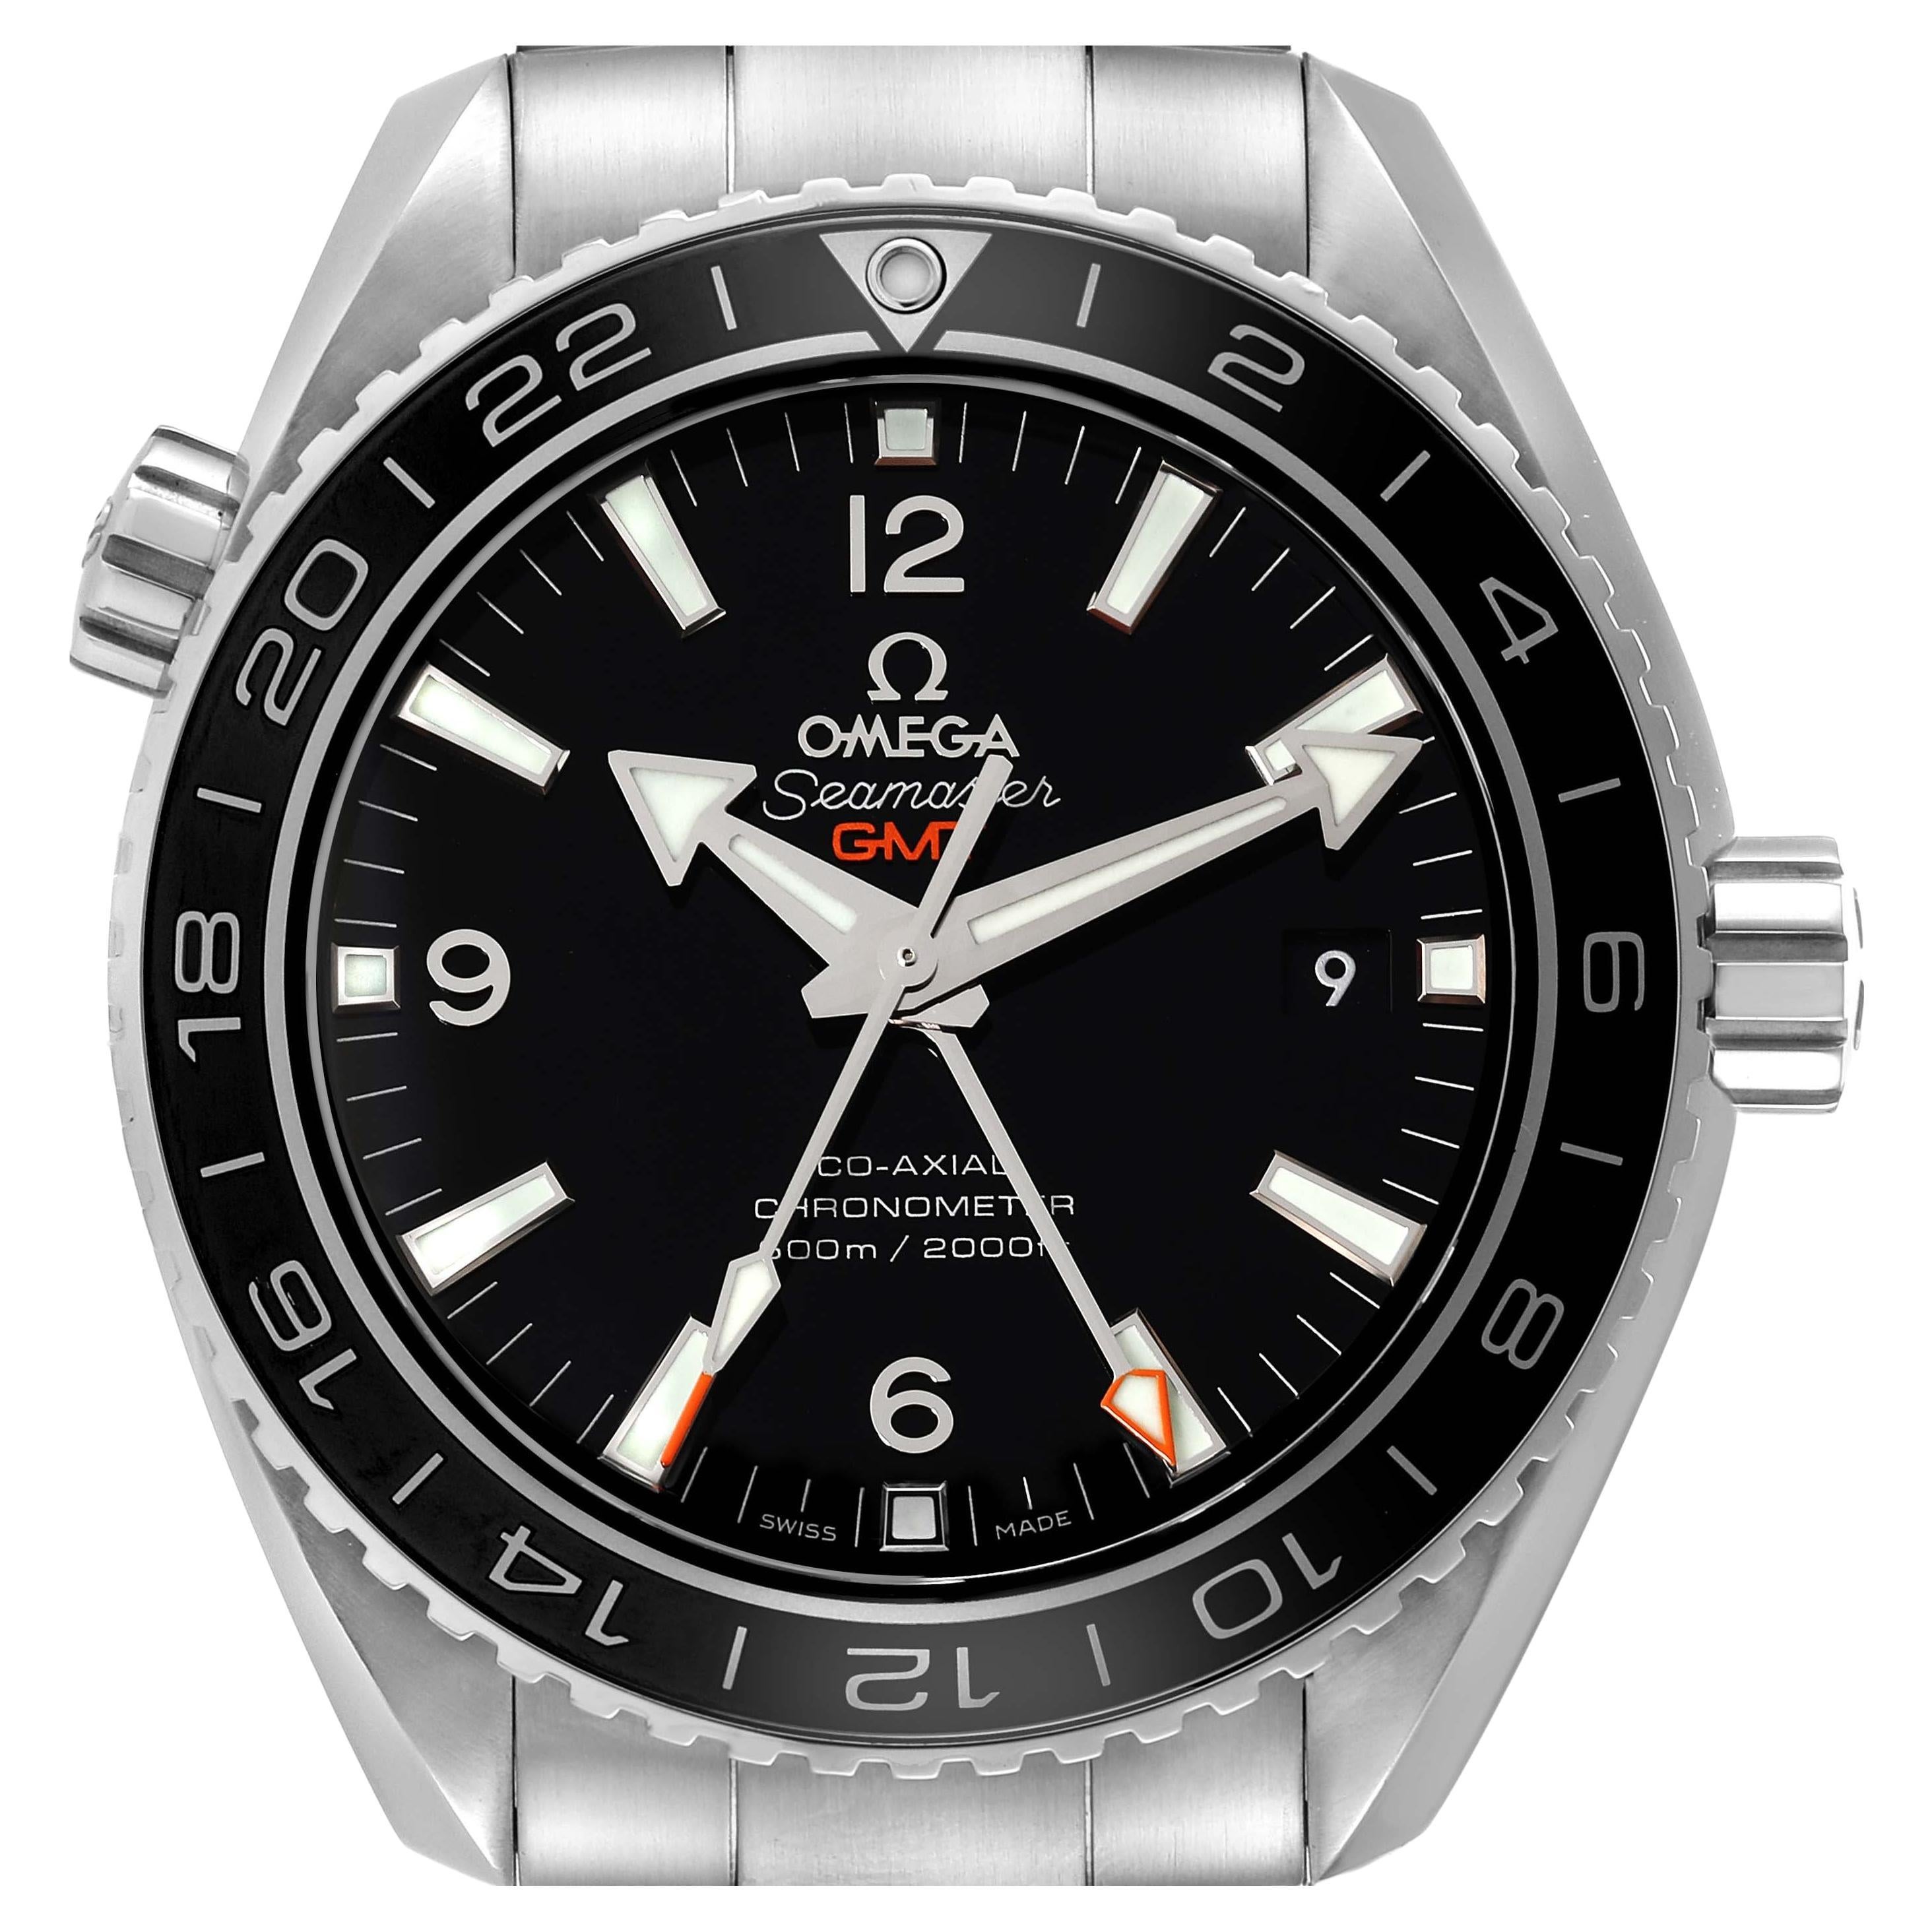 Omega Seamaster Planet Ocean Steel Mens Watch 232.30.44.22.01.001 Box Card For Sale